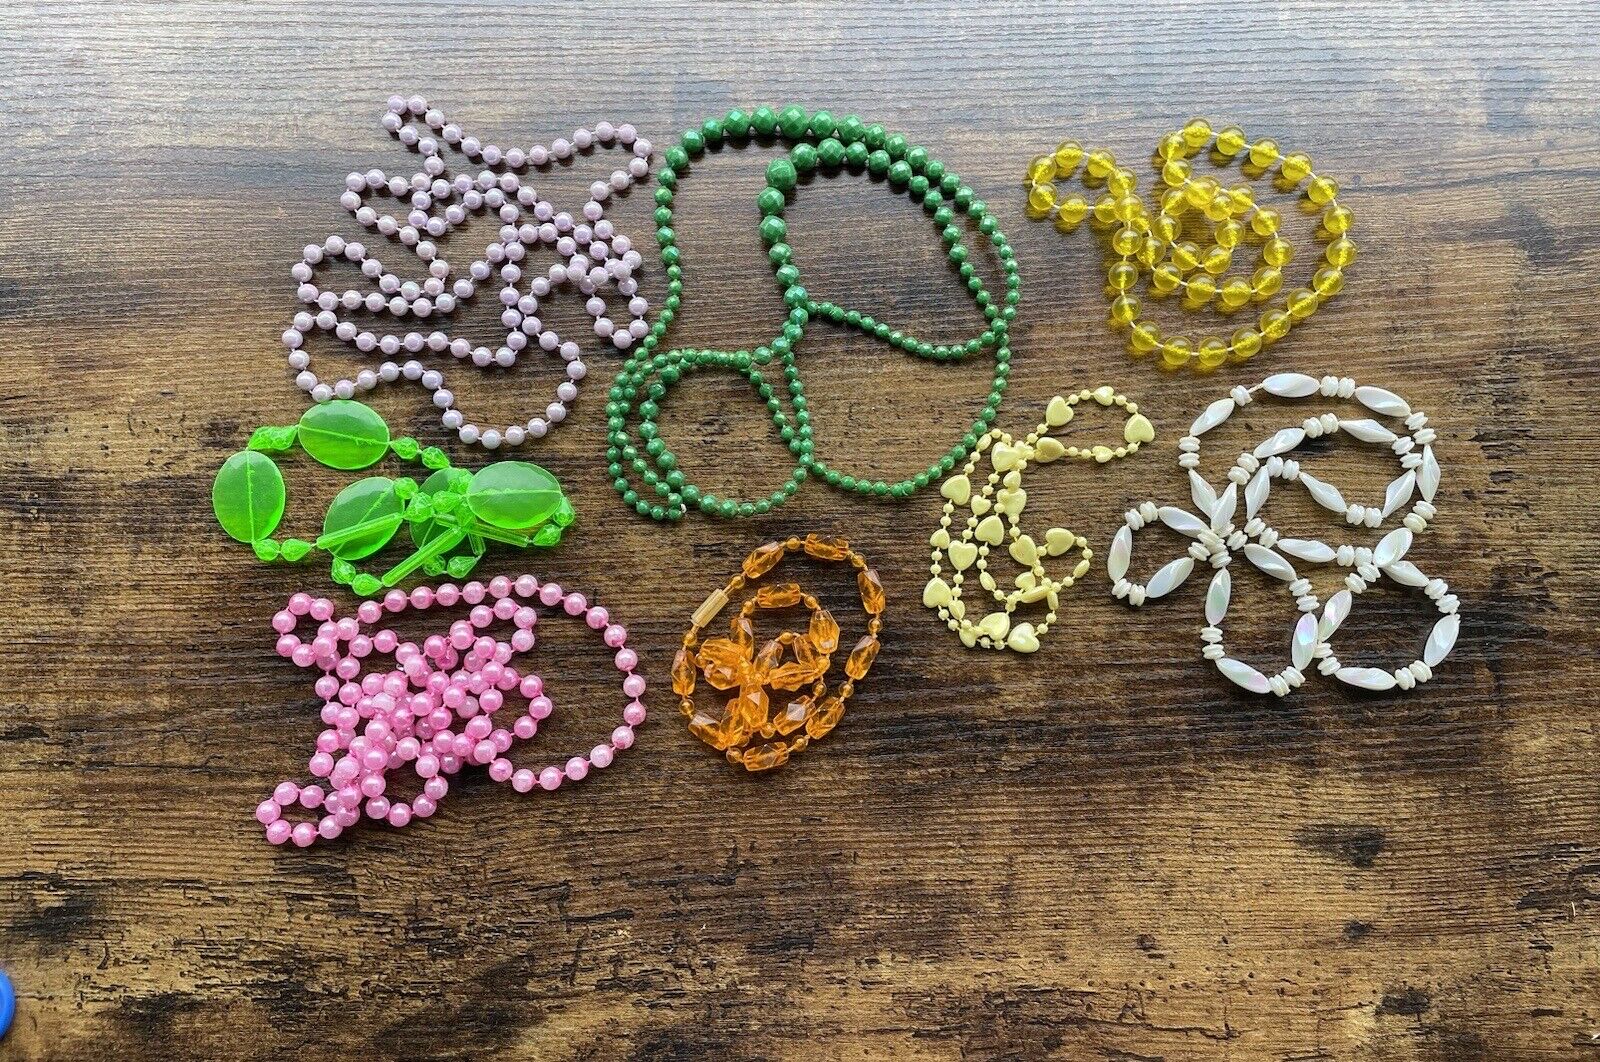 Lot 1970s New Orleans Mardi Gras Beads Necklaces